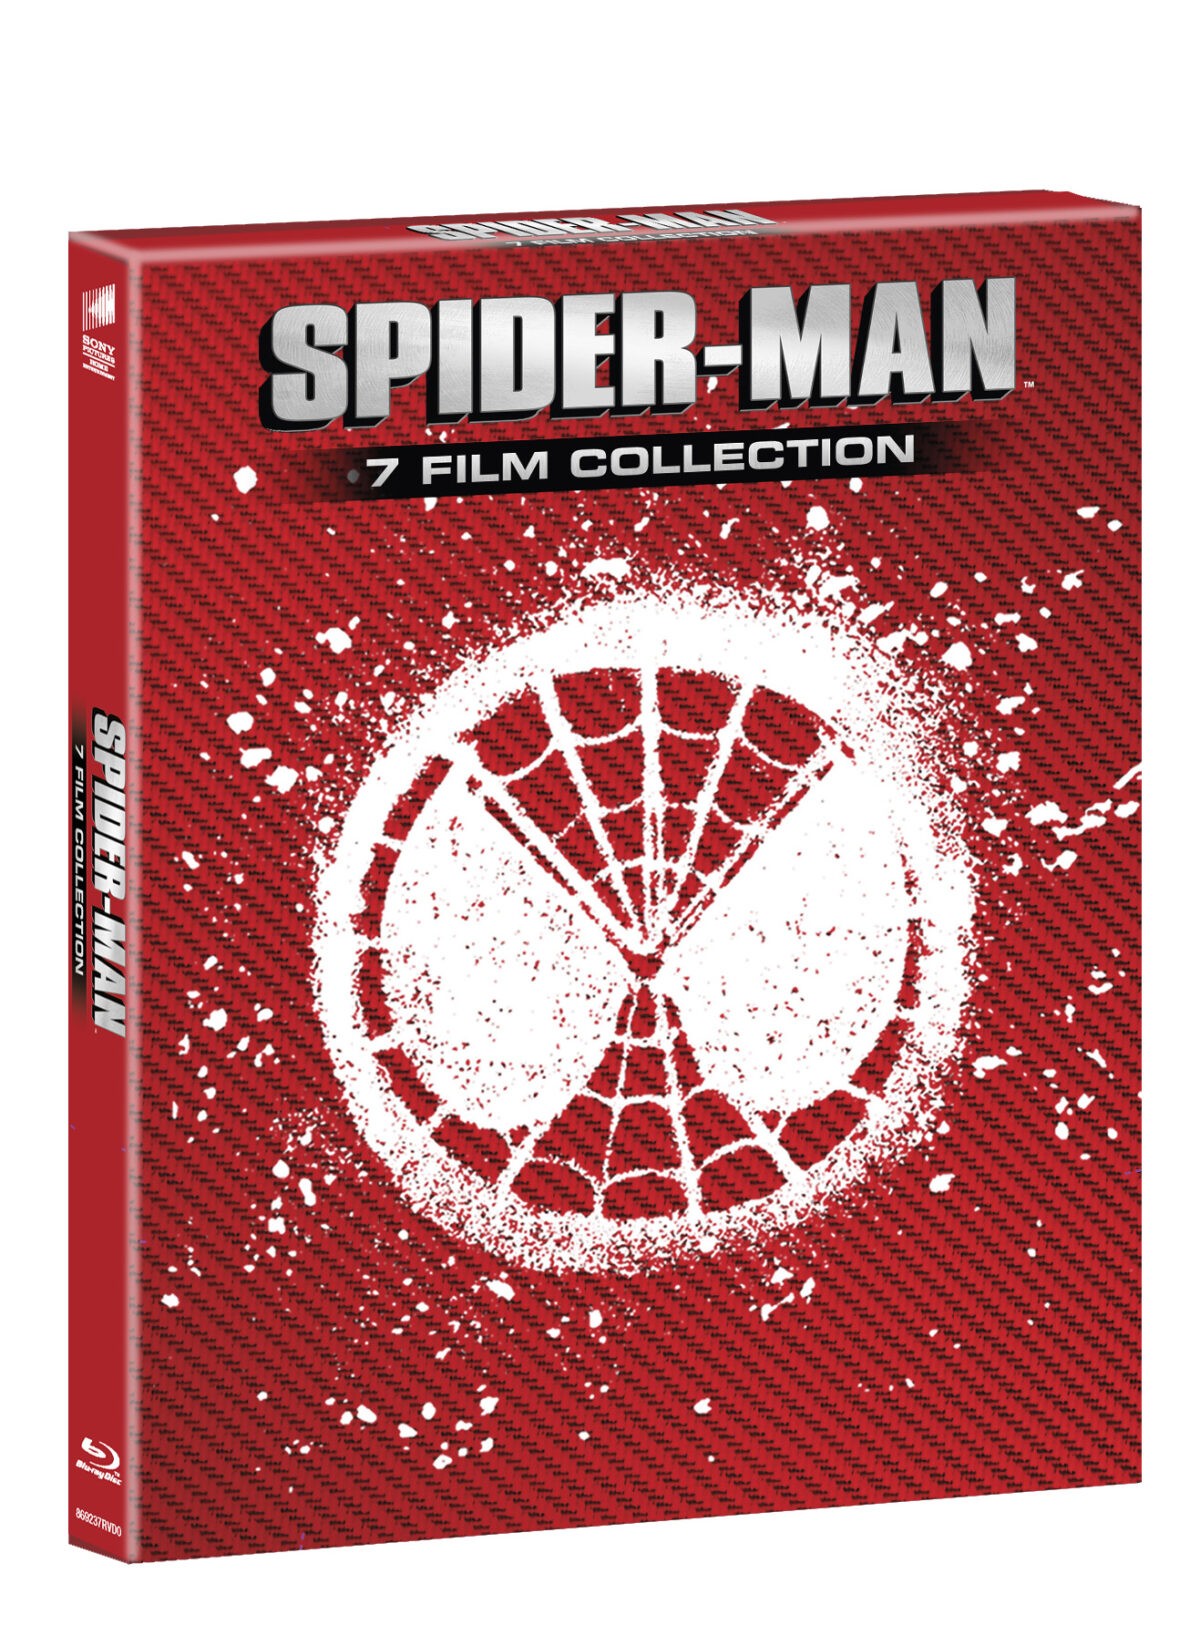 SpidermanCollection_1_7_BD_Evergreen(1)